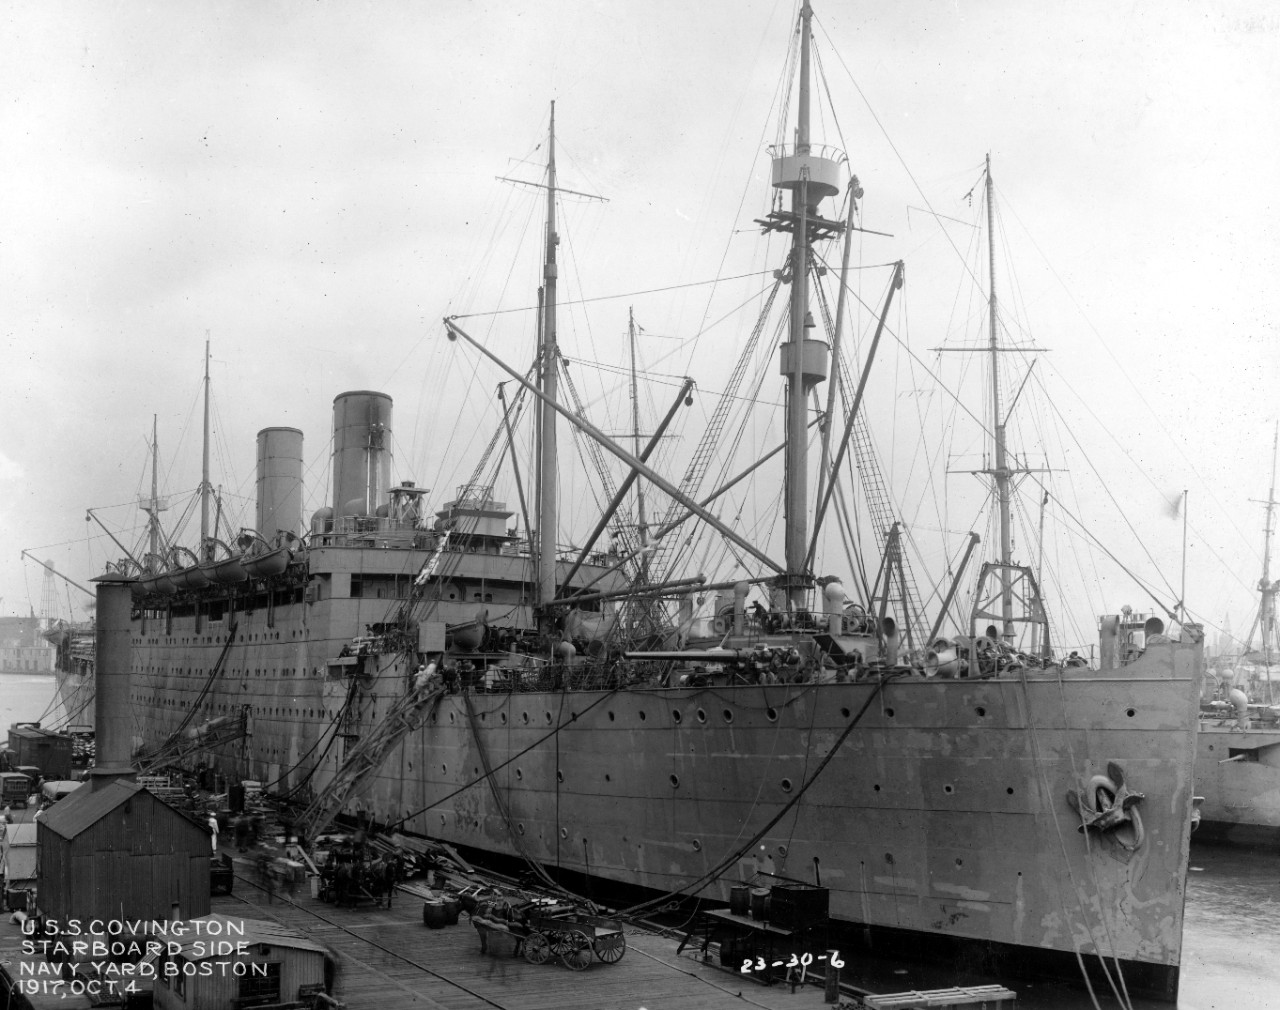 Covington moored at the Boston Navy Yard, 4 October 1917, her starboard forward 6-inch gun trained almost on the beam. Note dockside activity, with horse-drawn transport and a Lehigh Valley railroad box car in evidence on the pier. (U.S. Navy Bureau of Ships Photograph 19-N-3402, National Archives and Records Administration, Still Pictures Division, College Park, Md.)